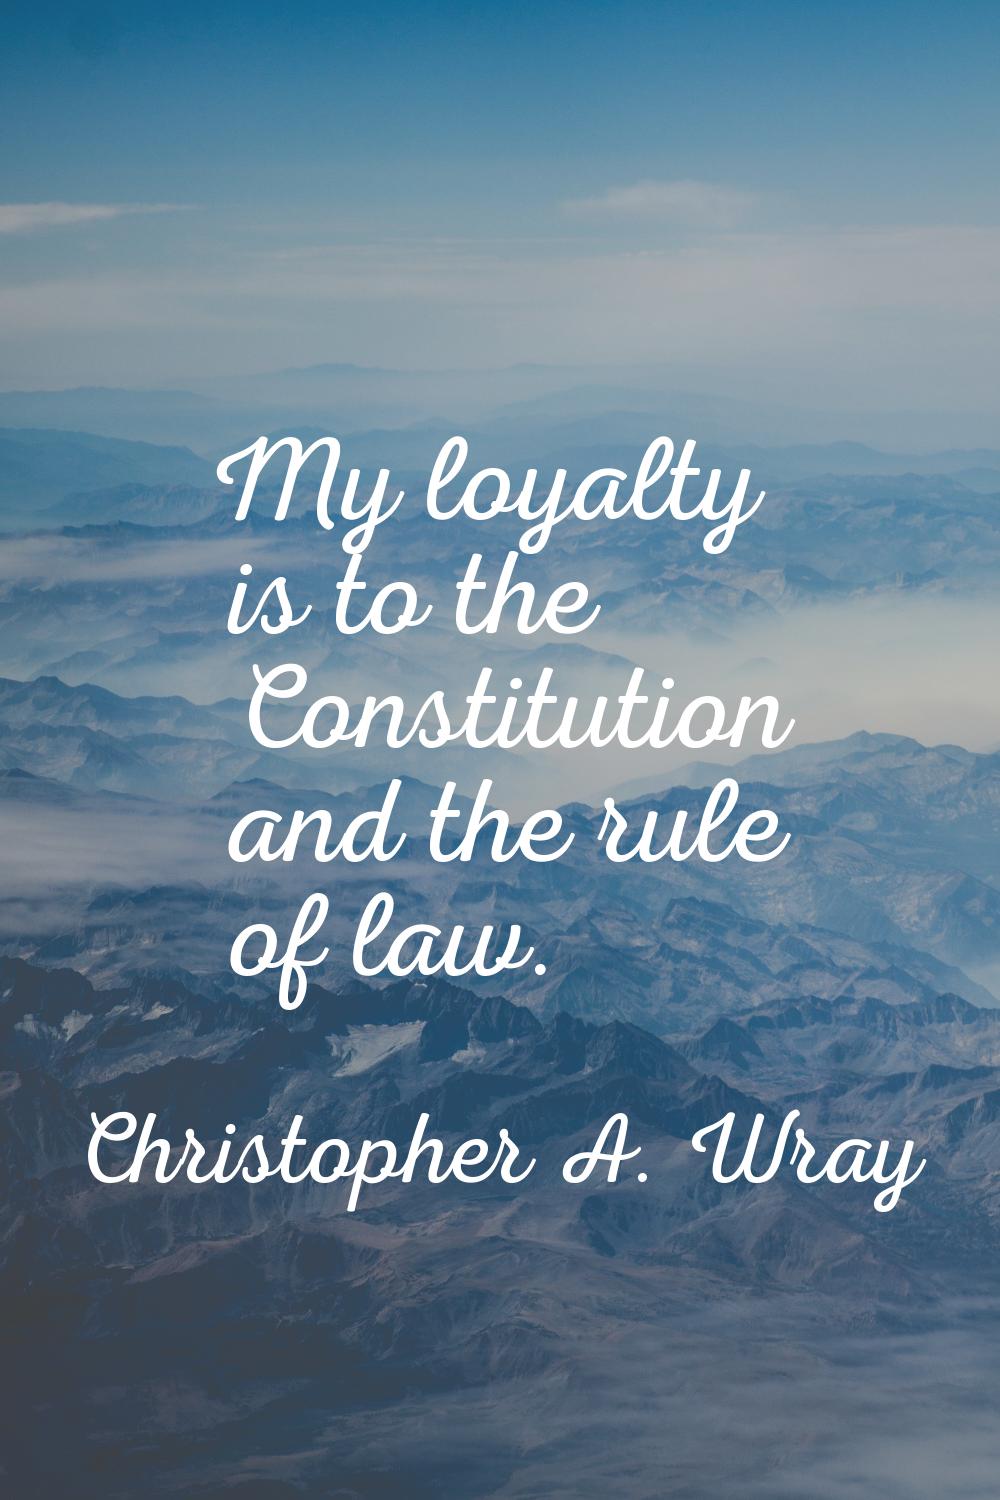 My loyalty is to the Constitution and the rule of law.